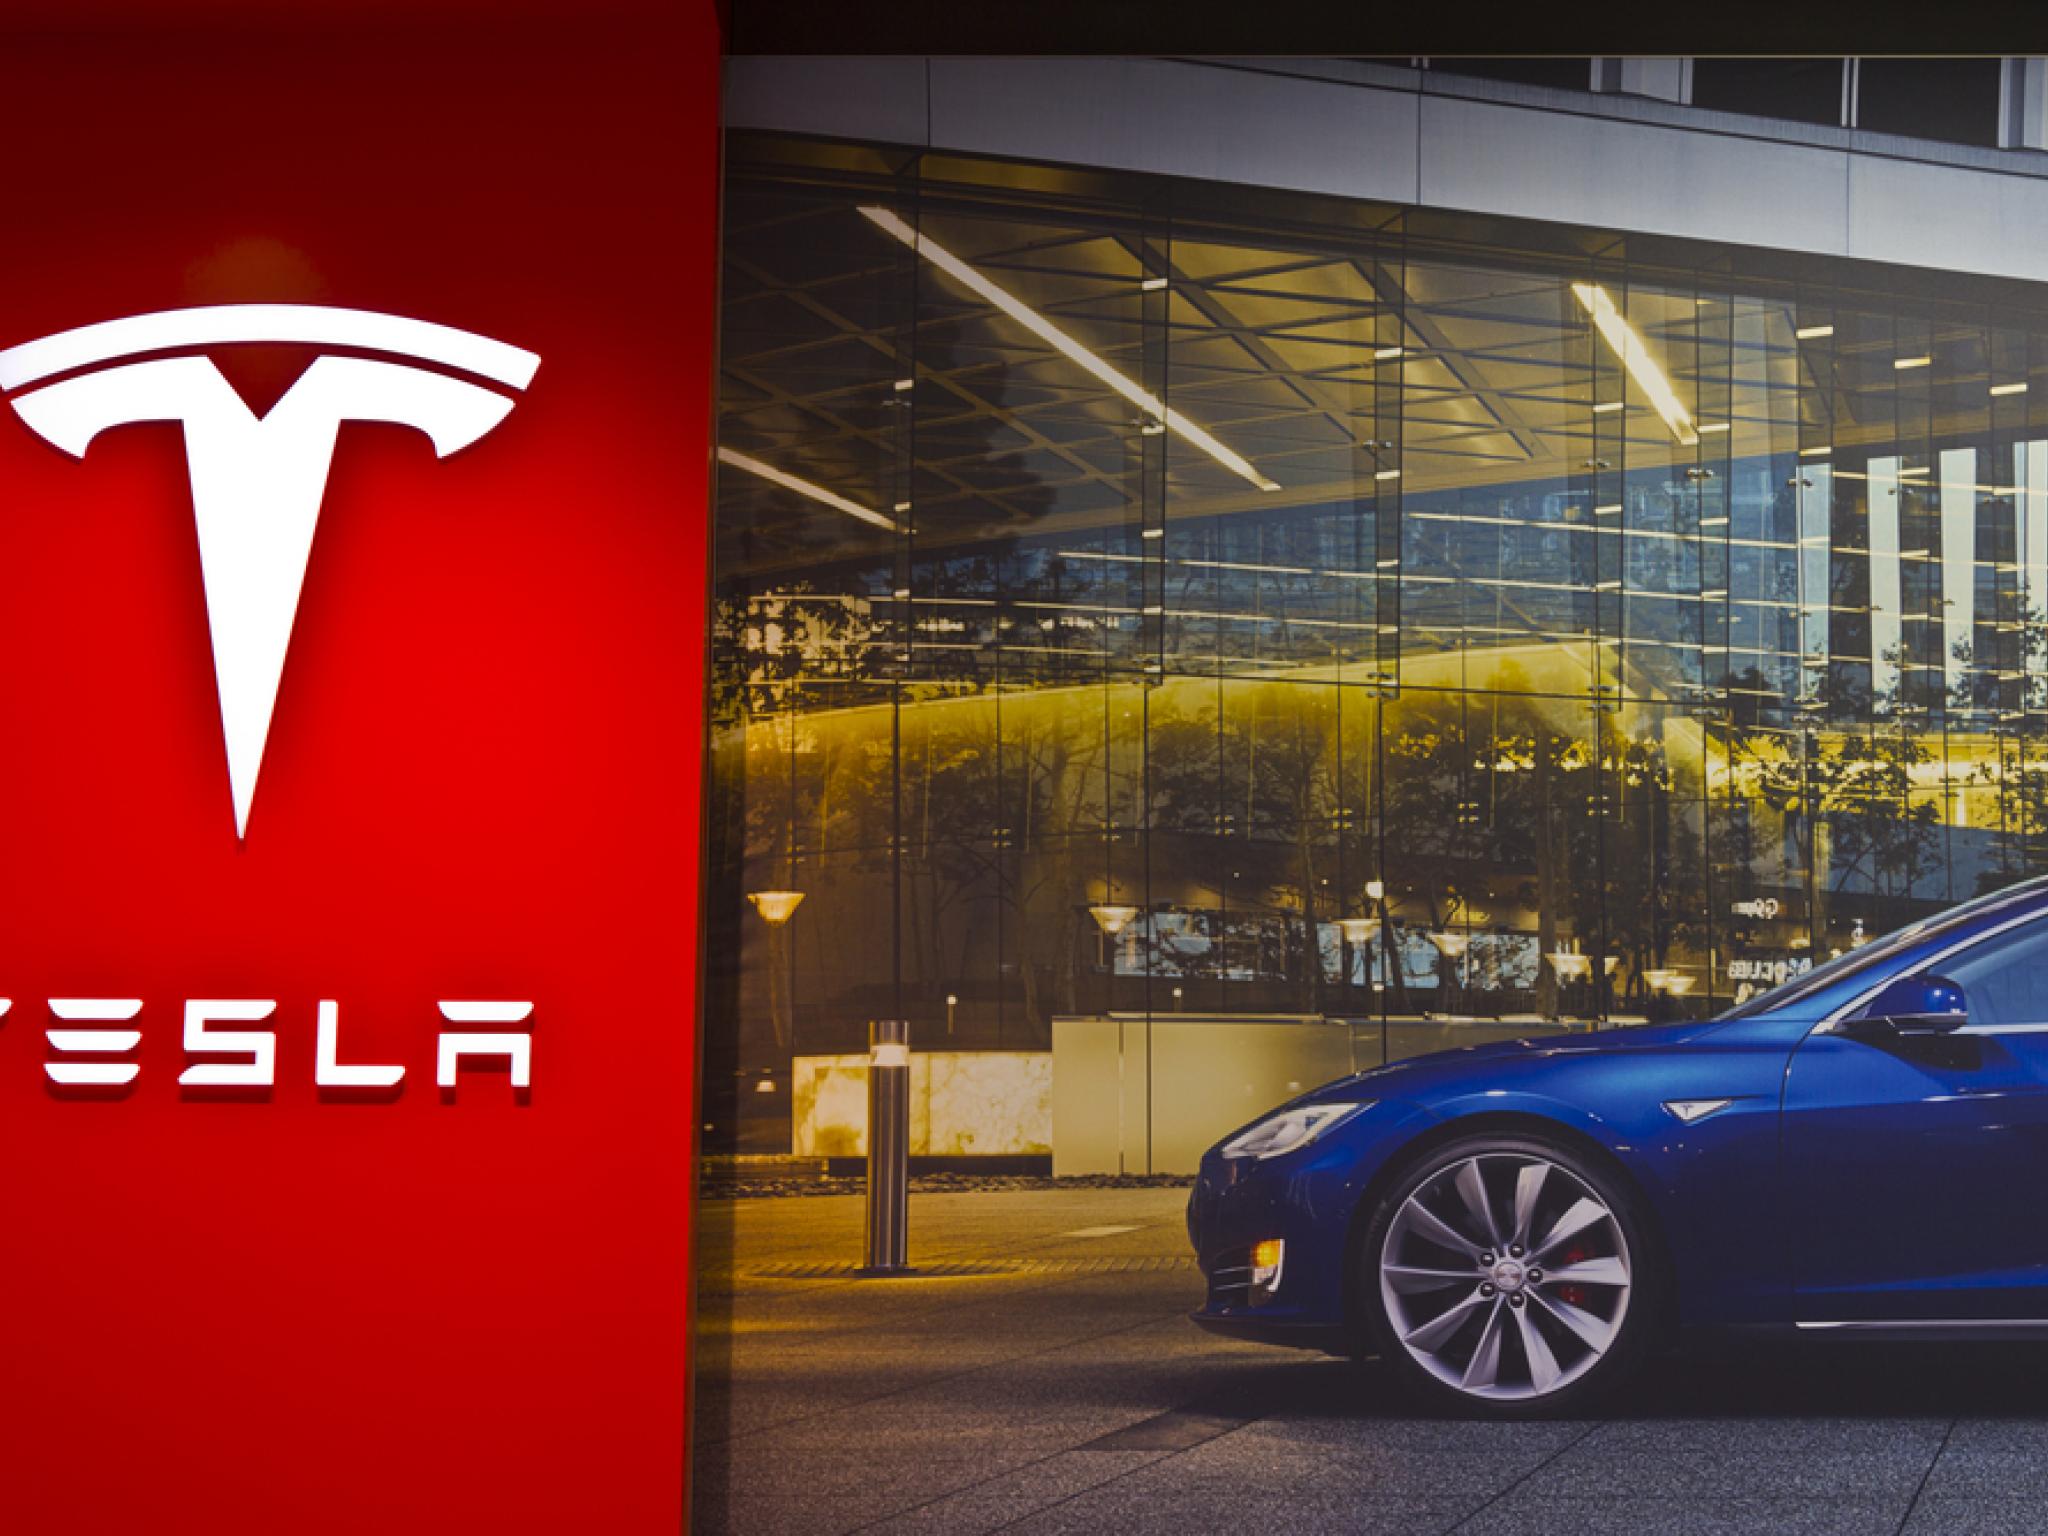  teslas-biggest-layoffs-mapped-has-ev-giant-cut-more-jobs-in-america-than-abroad-updated 